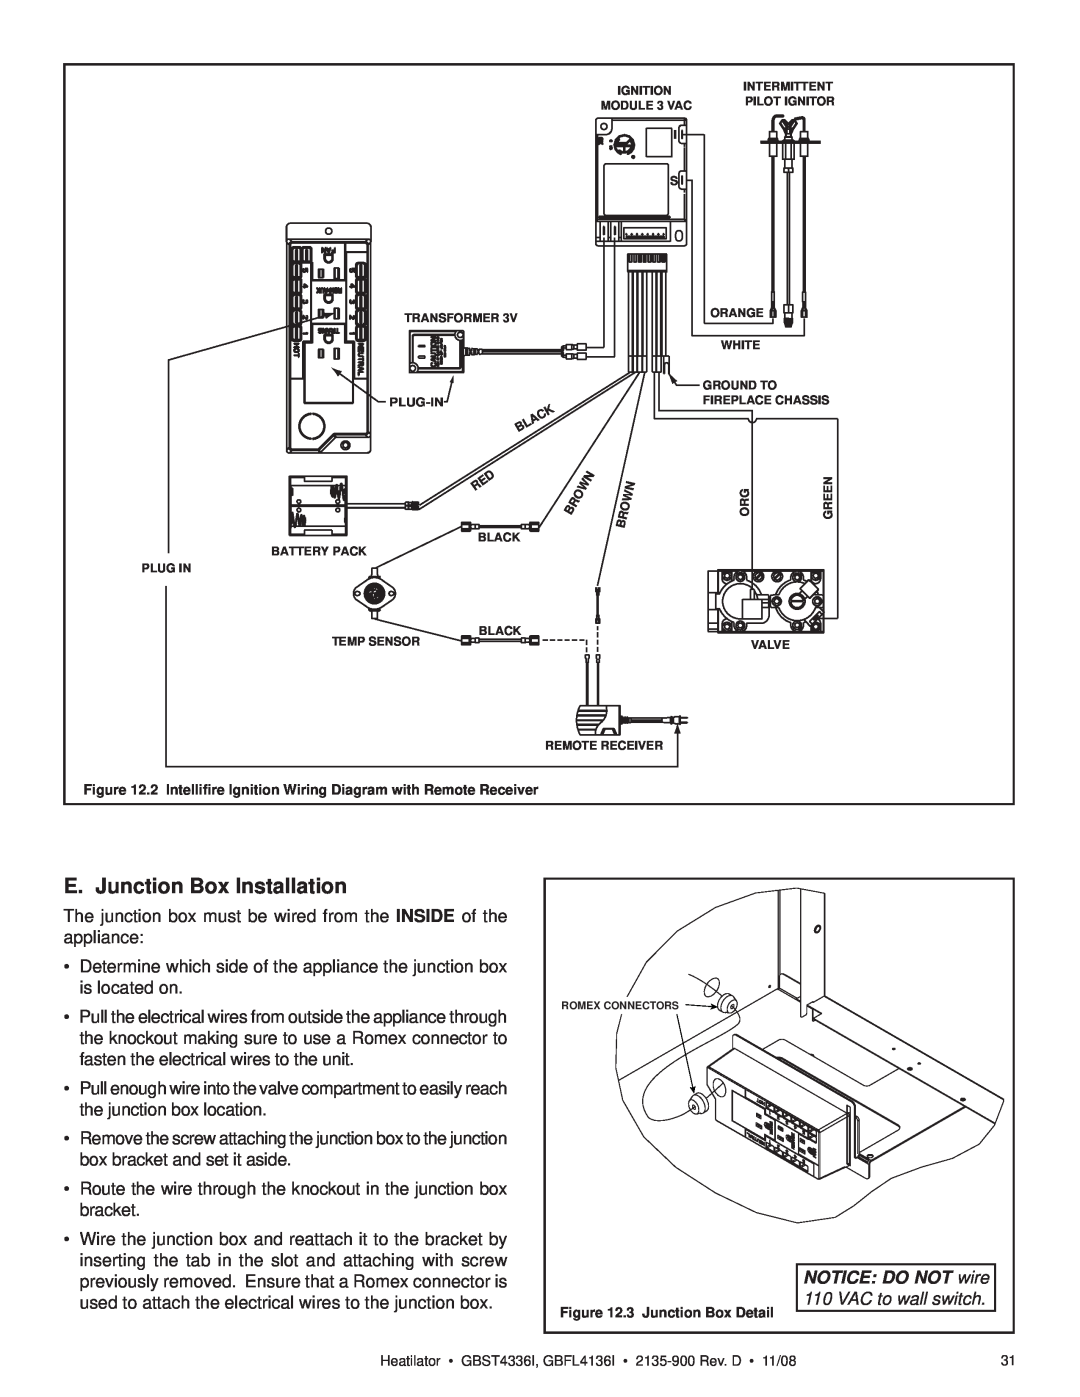 Hearth and Home Technologies GBST4336I, GBFL4136I E. Junction Box Installation, NOTICE DO NOT wire, VAC to wall switch 